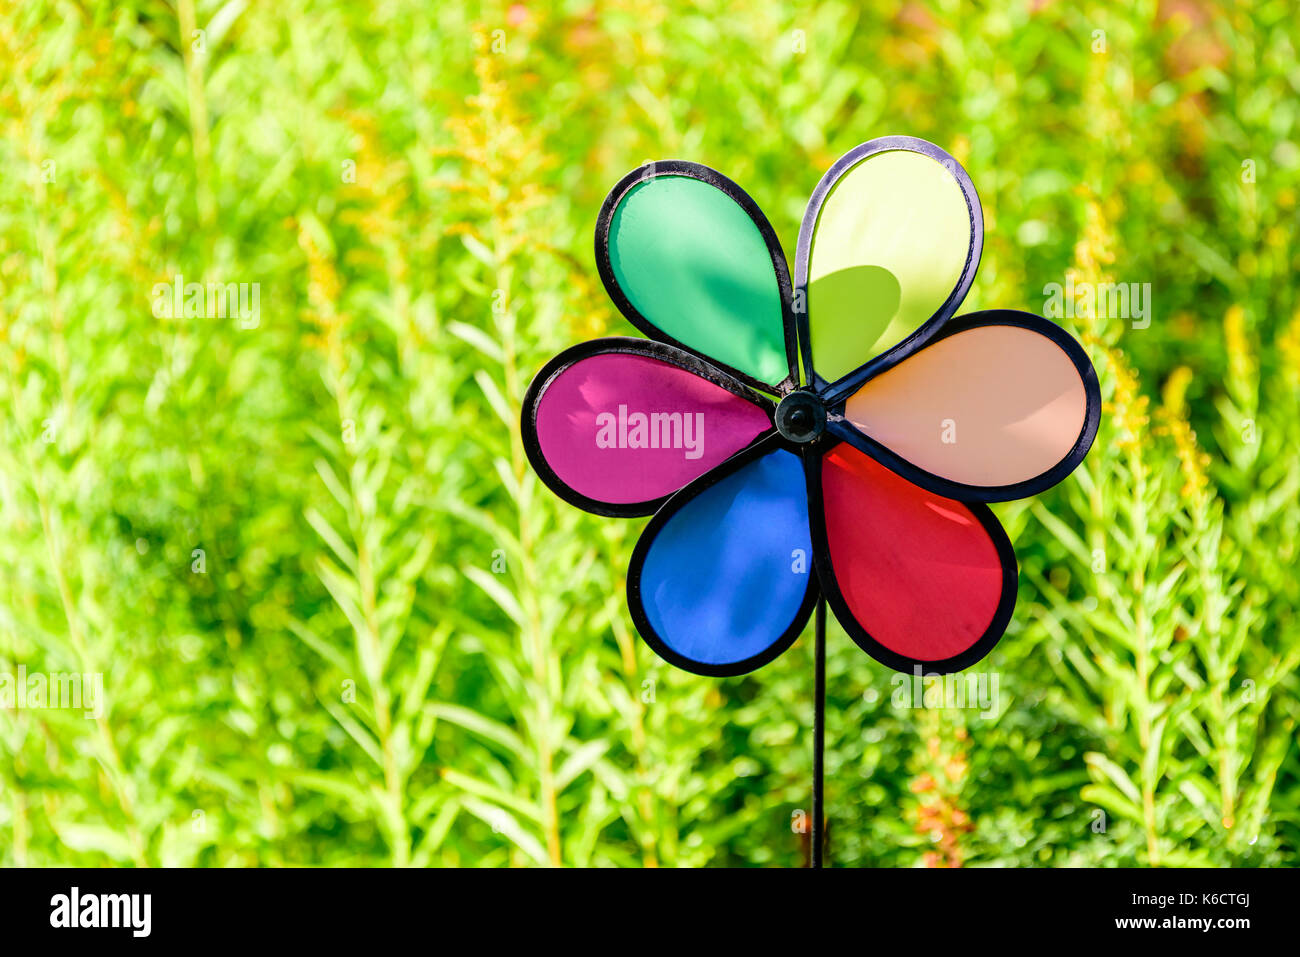 Colorful wind wheel in garden. Blurred background. Stock Photo